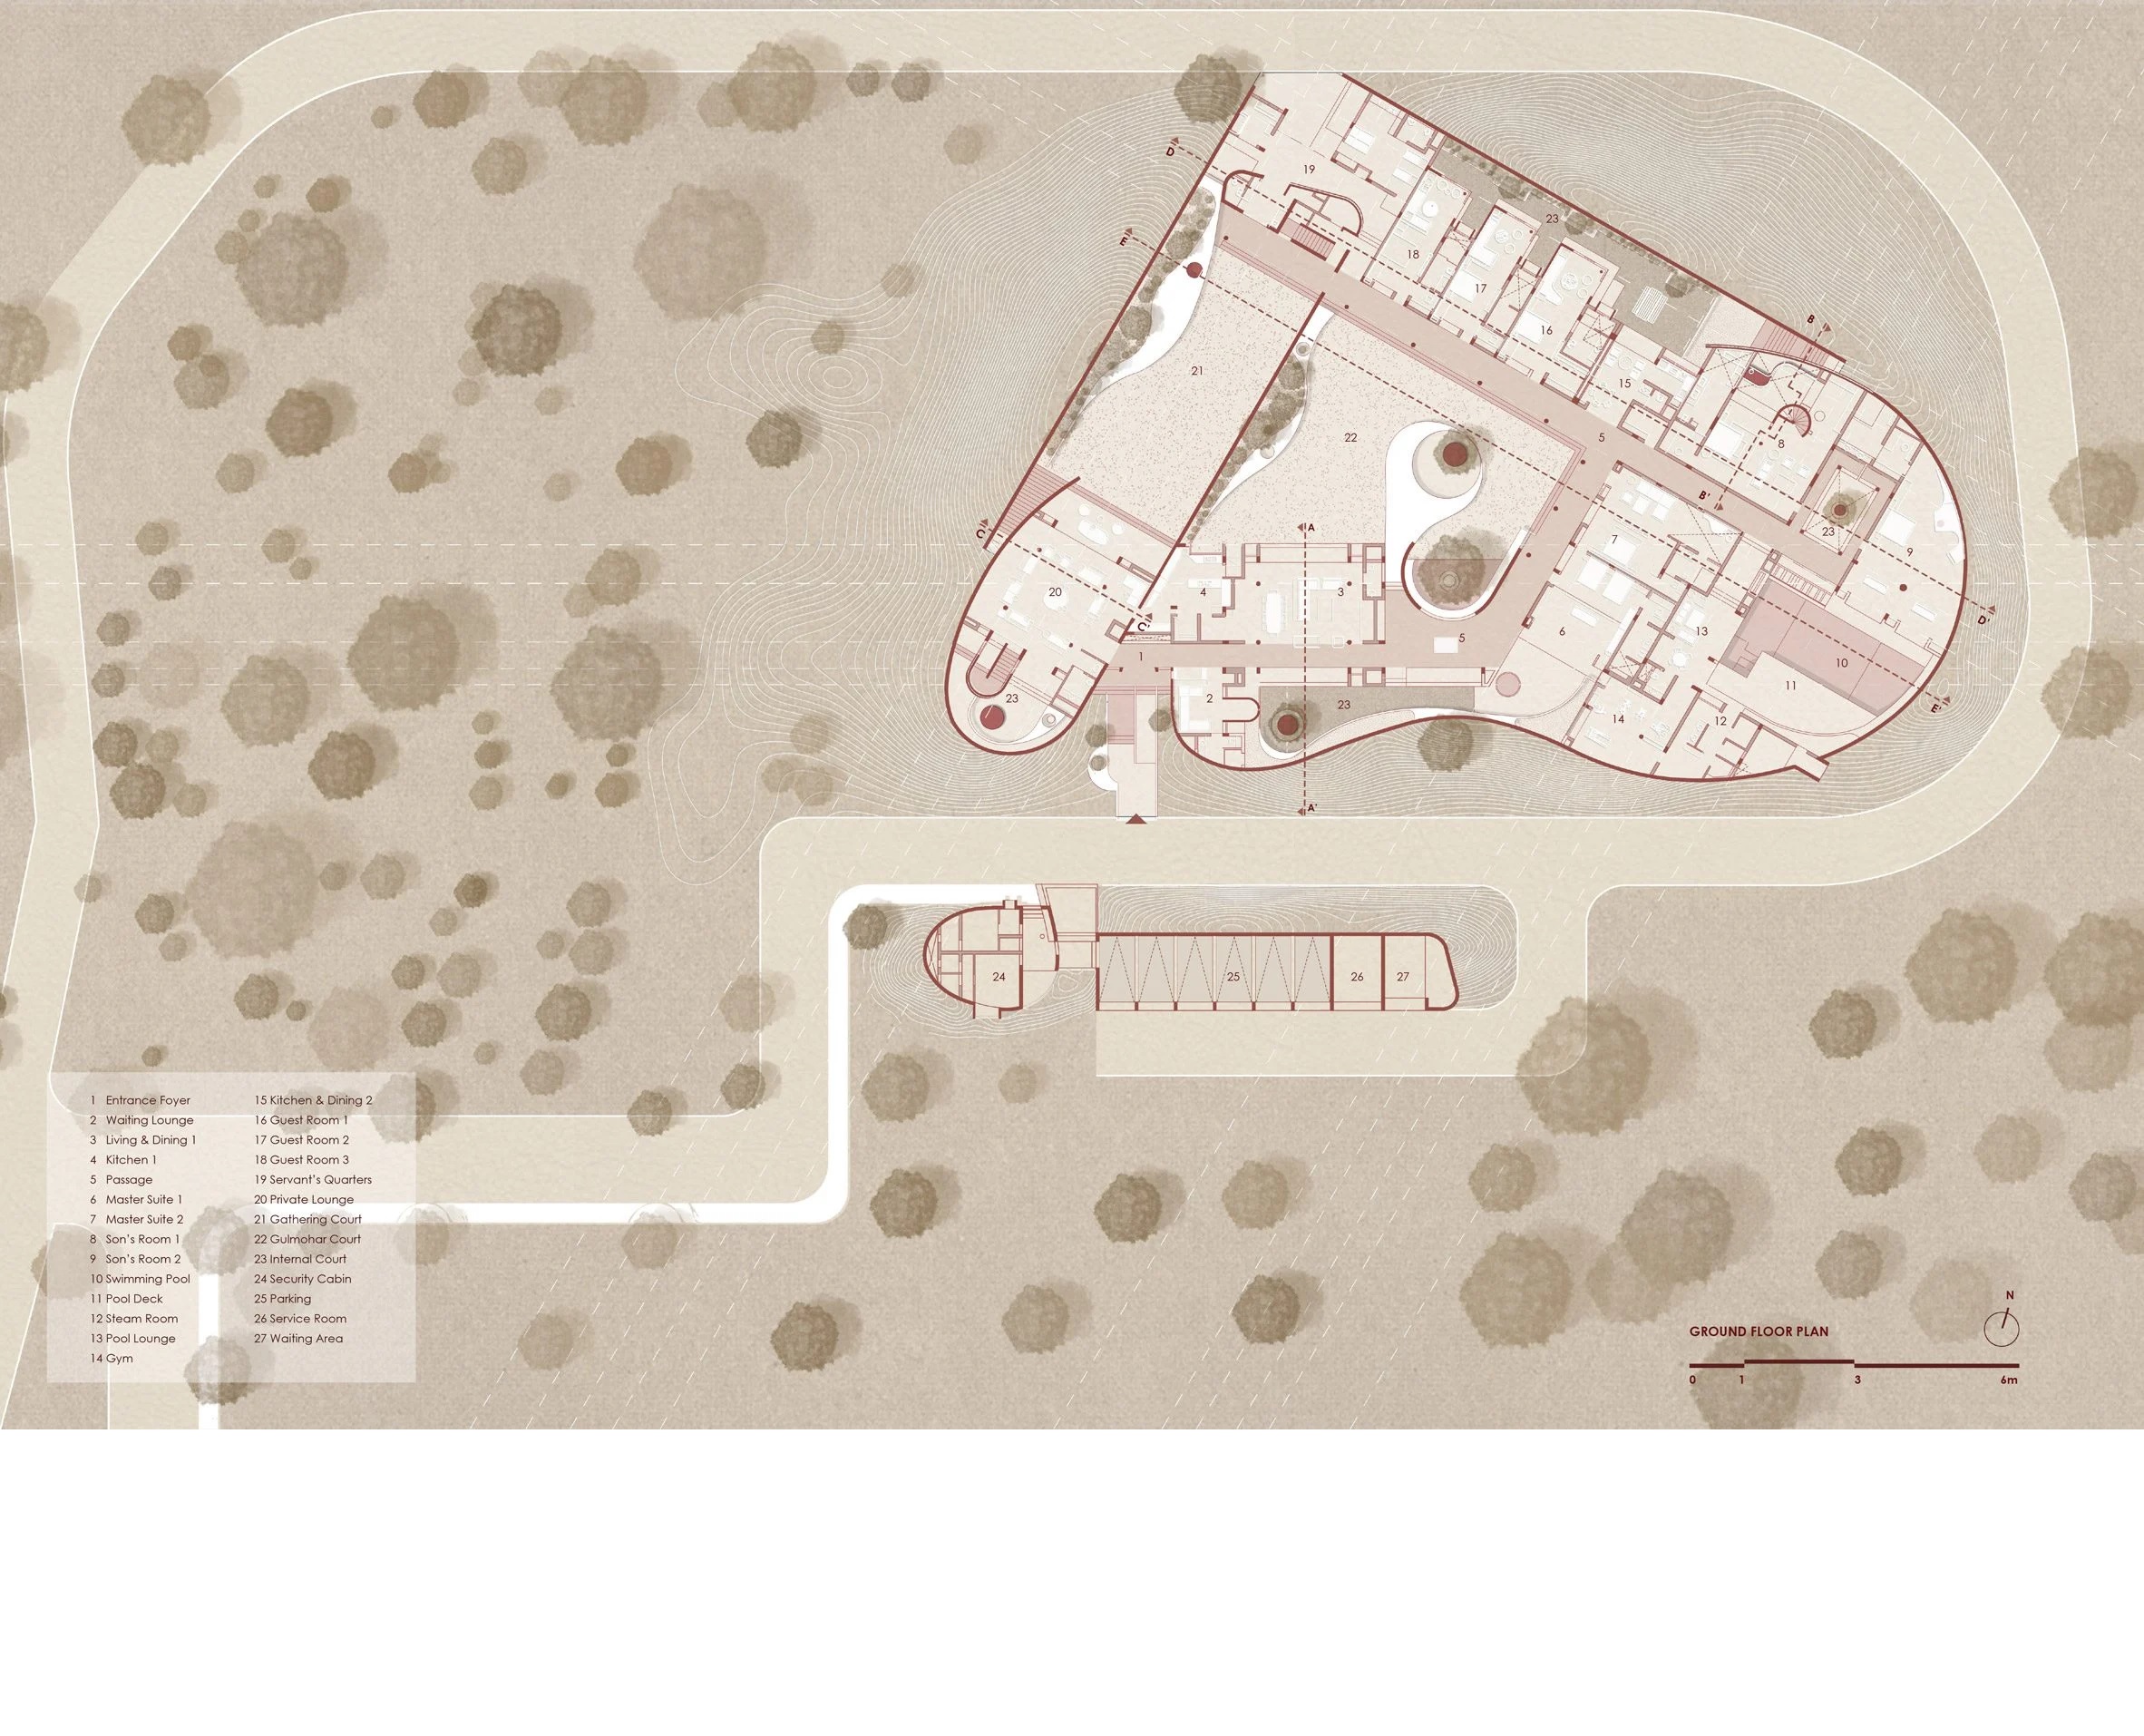 Site plan of Enclosure House, source by Design Ni Dukaan